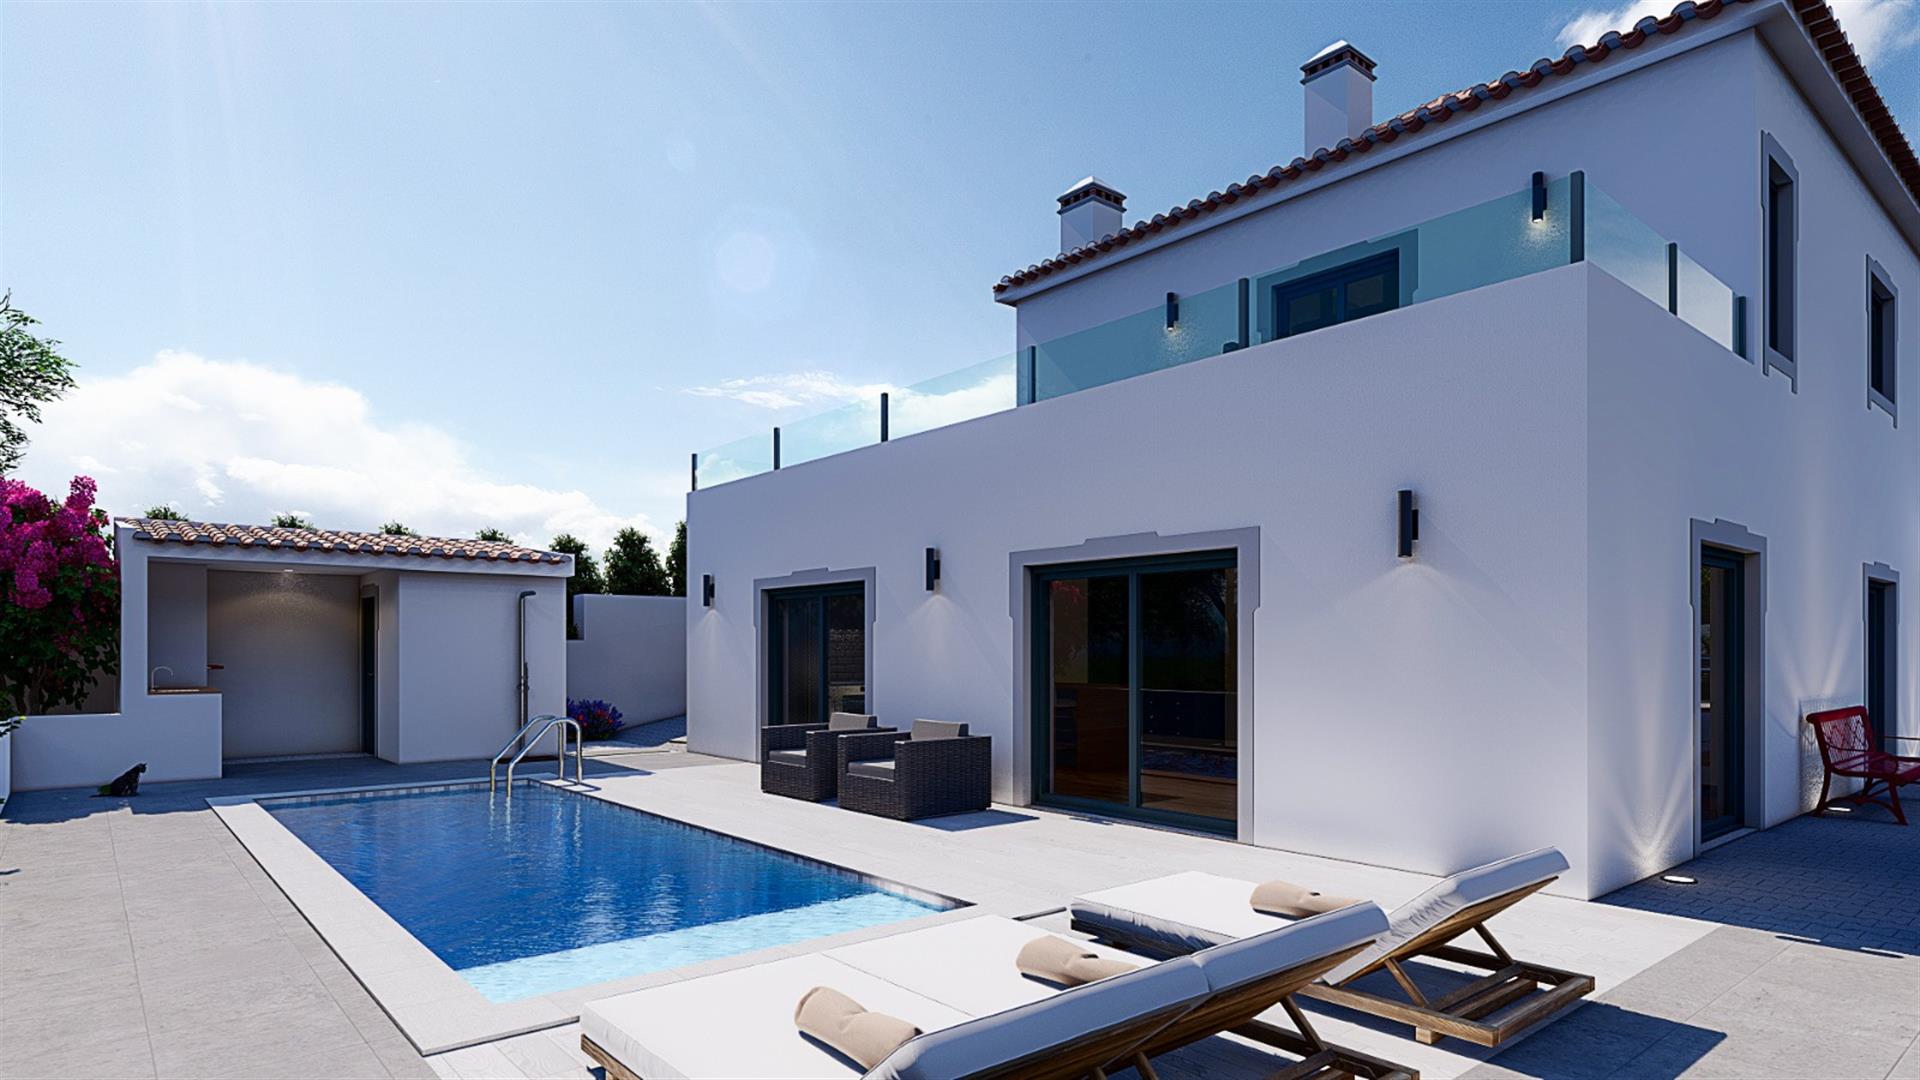 Excellent new T4 villa in the countryside and close to the beach and the city of Lisbon.